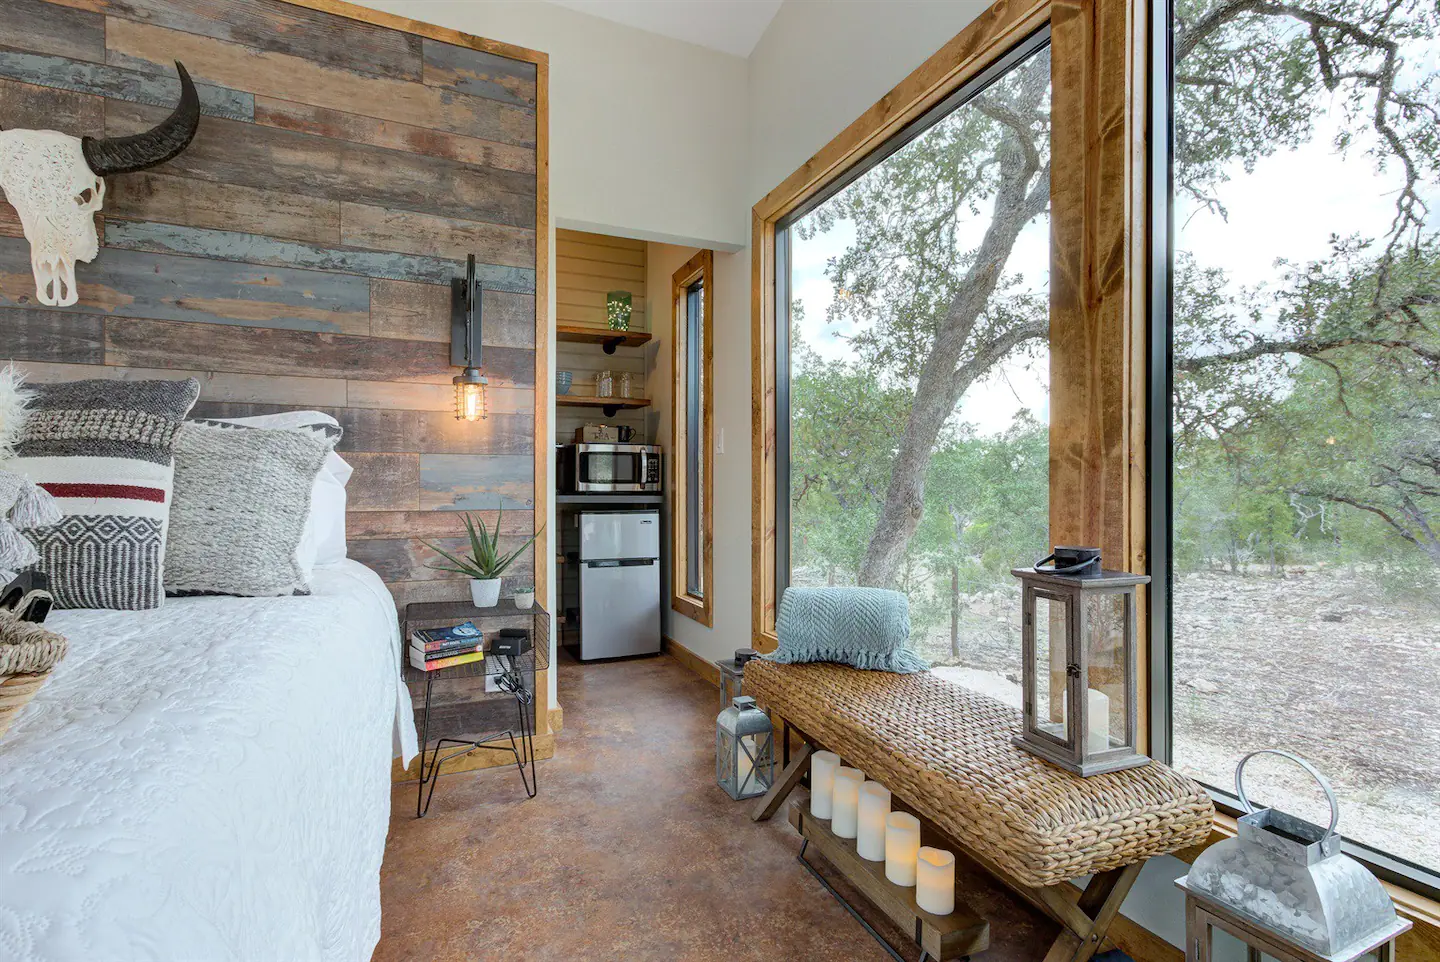 The Glass House is incredibly beautiful, with its exquisite rustic design and large windows!